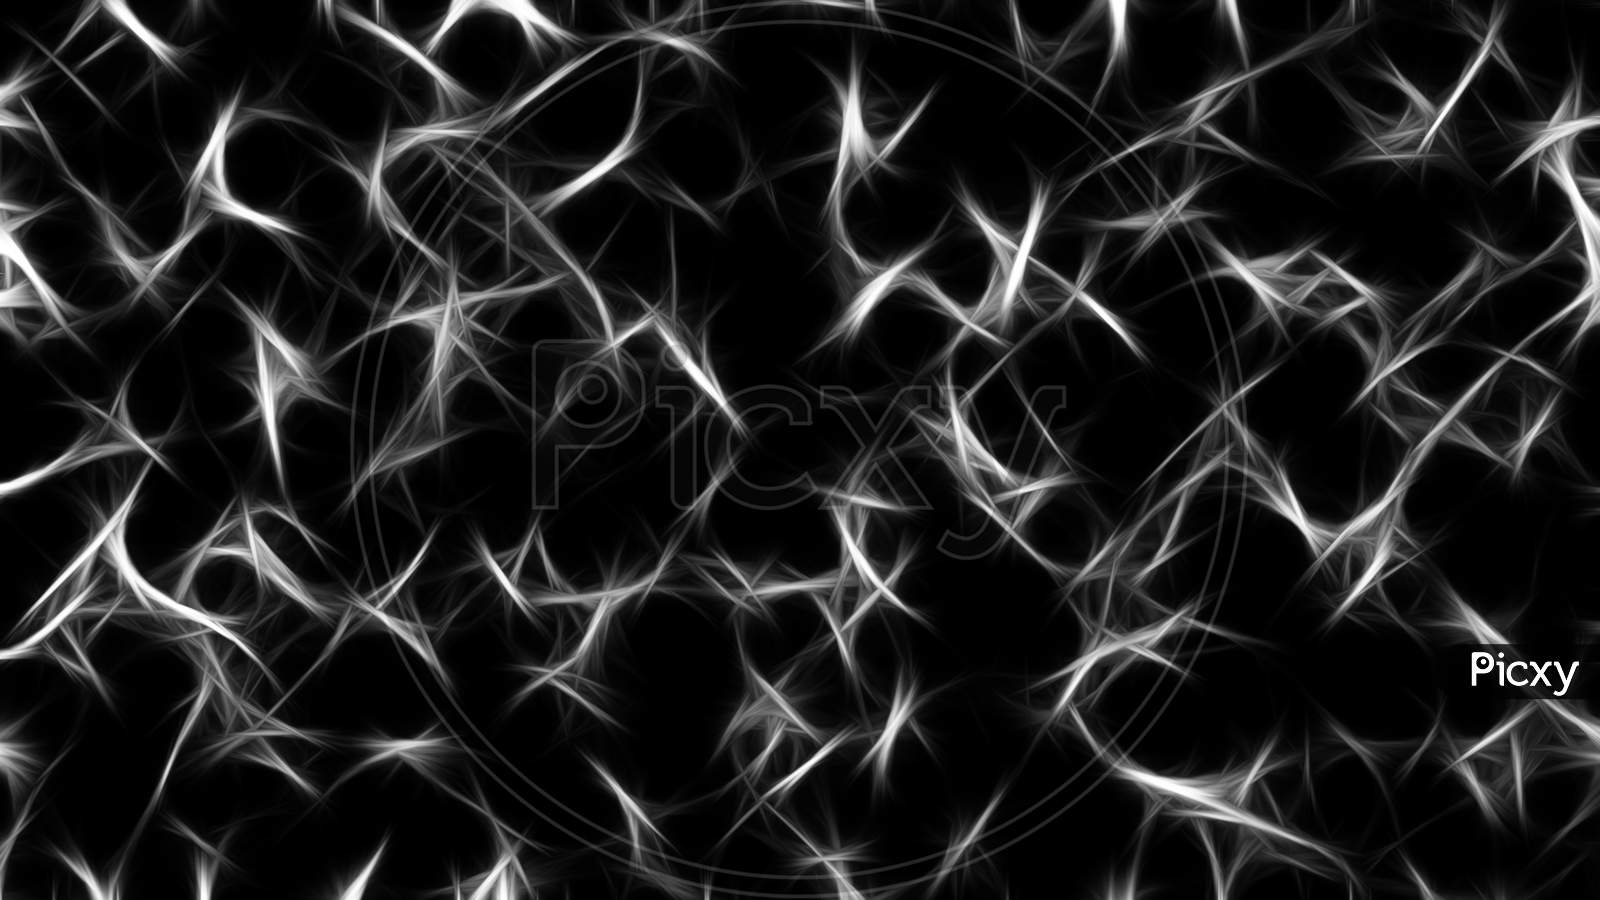 White Fur Blowing In The Air. White Feather On Isolated Black Background. Modern Art Concept.